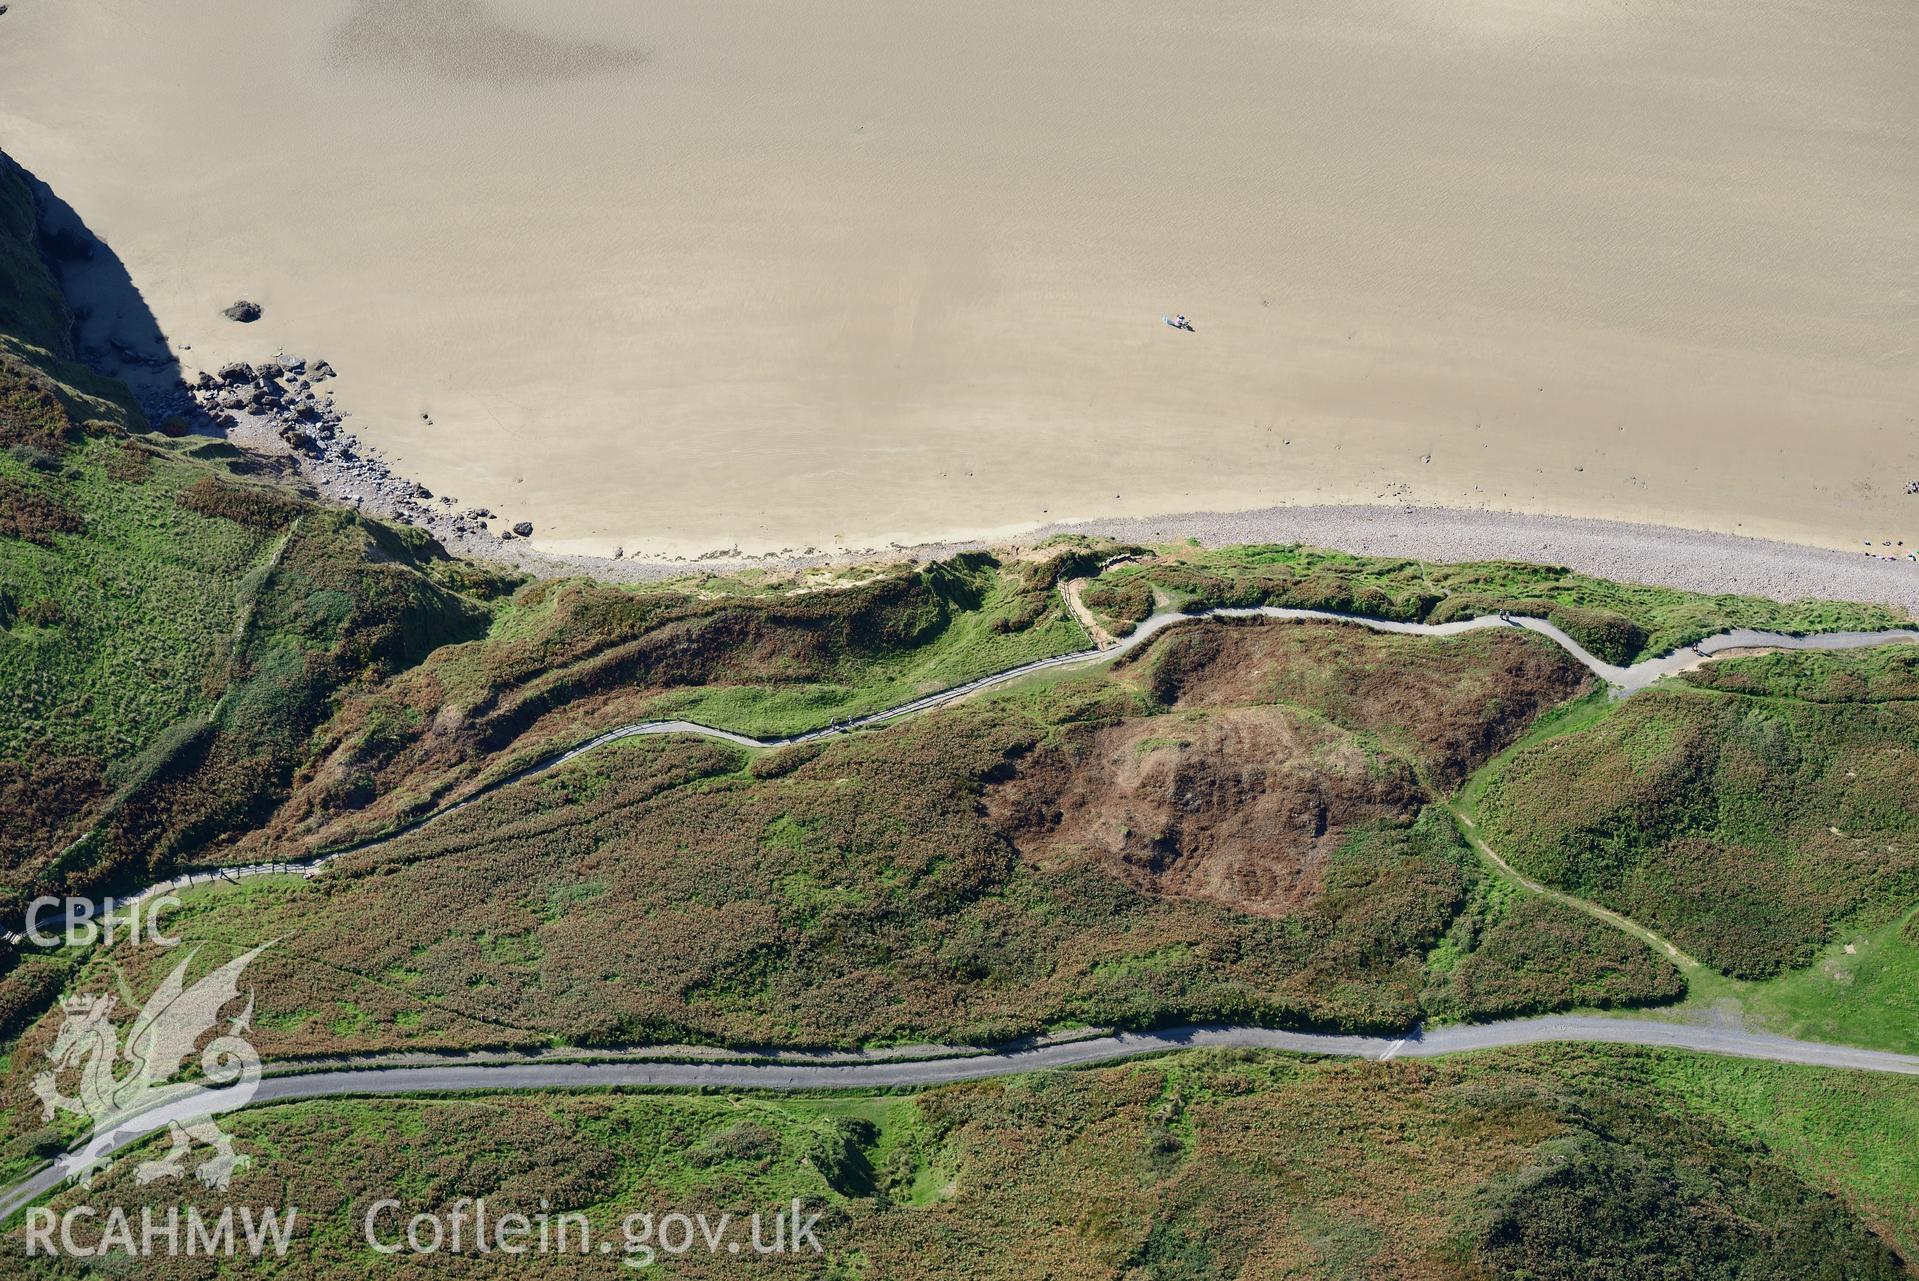 Rhossili Medieval Settlement, just above the sands at Rhosili Bay on the western edge of the Gower Peninsula. Oblique aerial photograph taken during the Royal Commission's programme of archaeological aerial reconnaissance by Toby Driver on 30th September 2015.